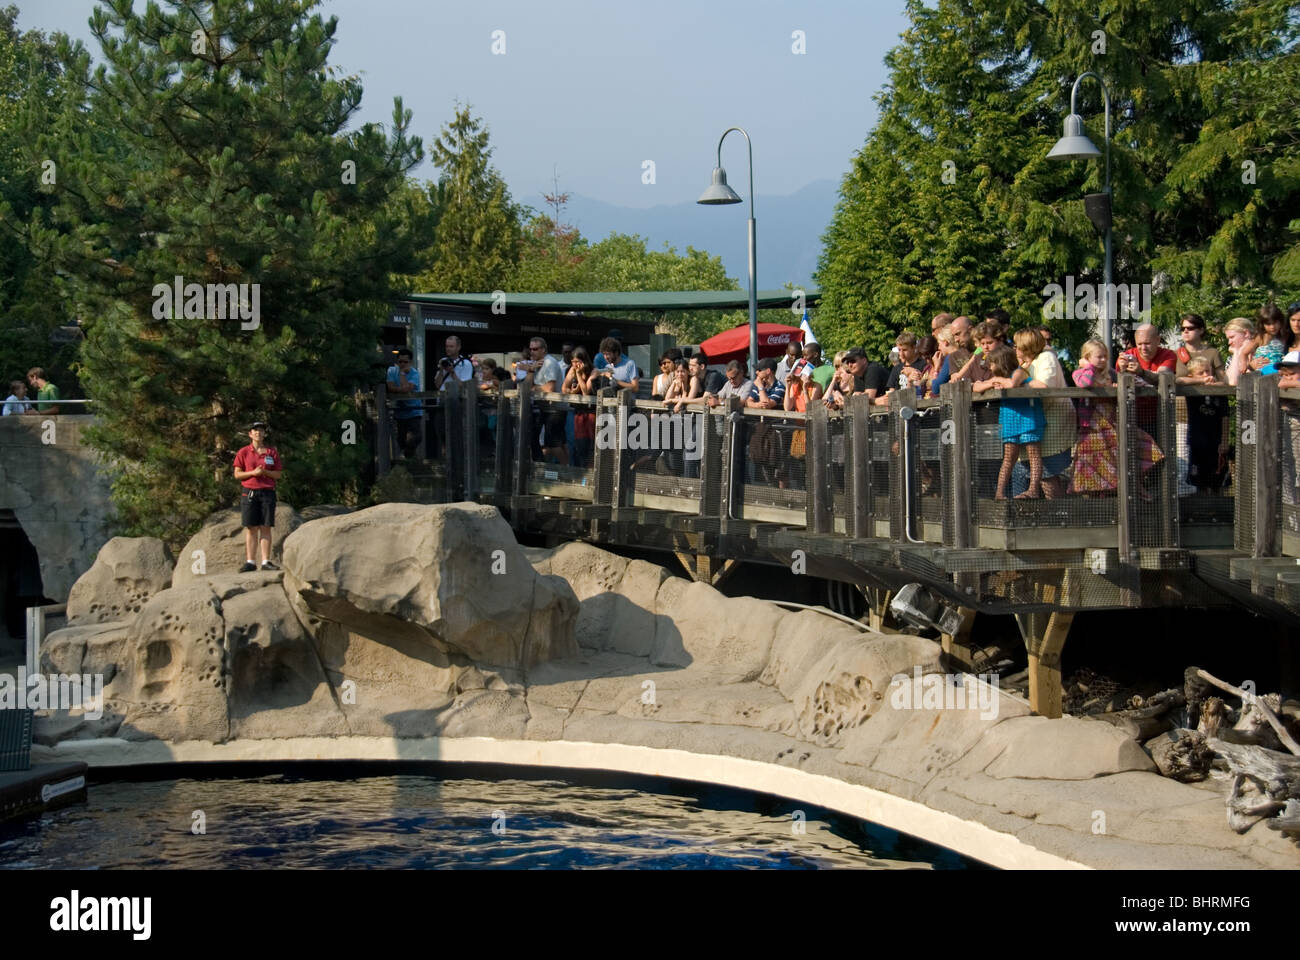 Spectators waiting for the dolphin show at Vancouver Aquarium in British Columbia Canada in Stanley Park. Stock Photo